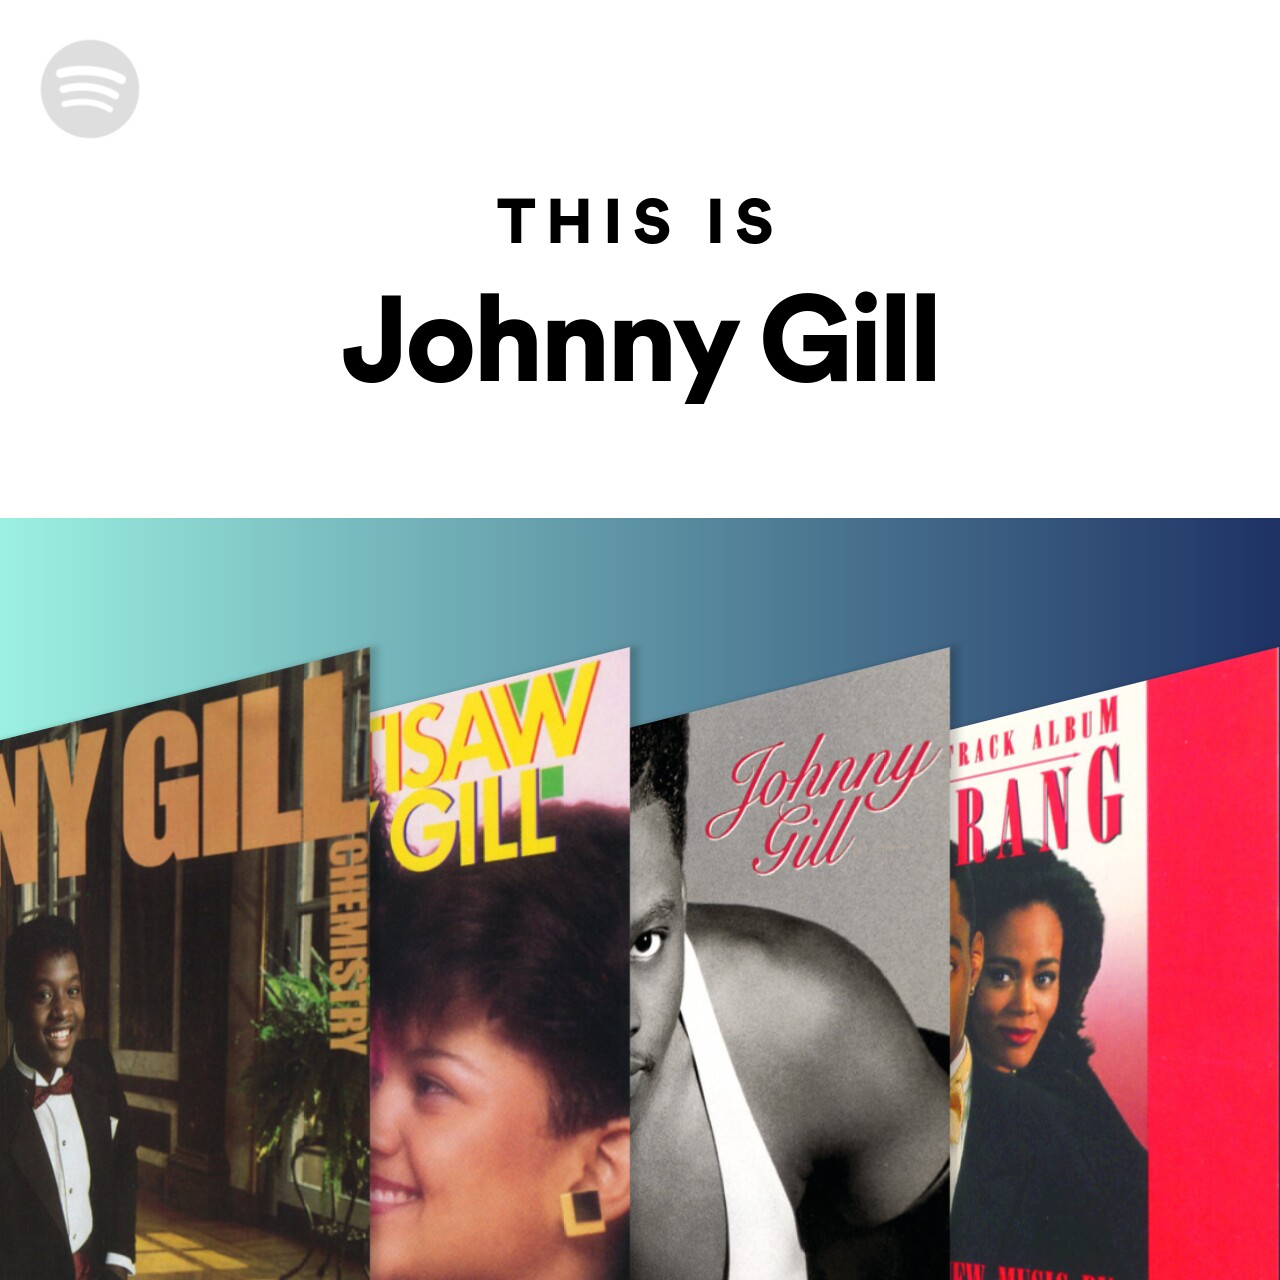 This Is Johnny Gill Spotify Playlist